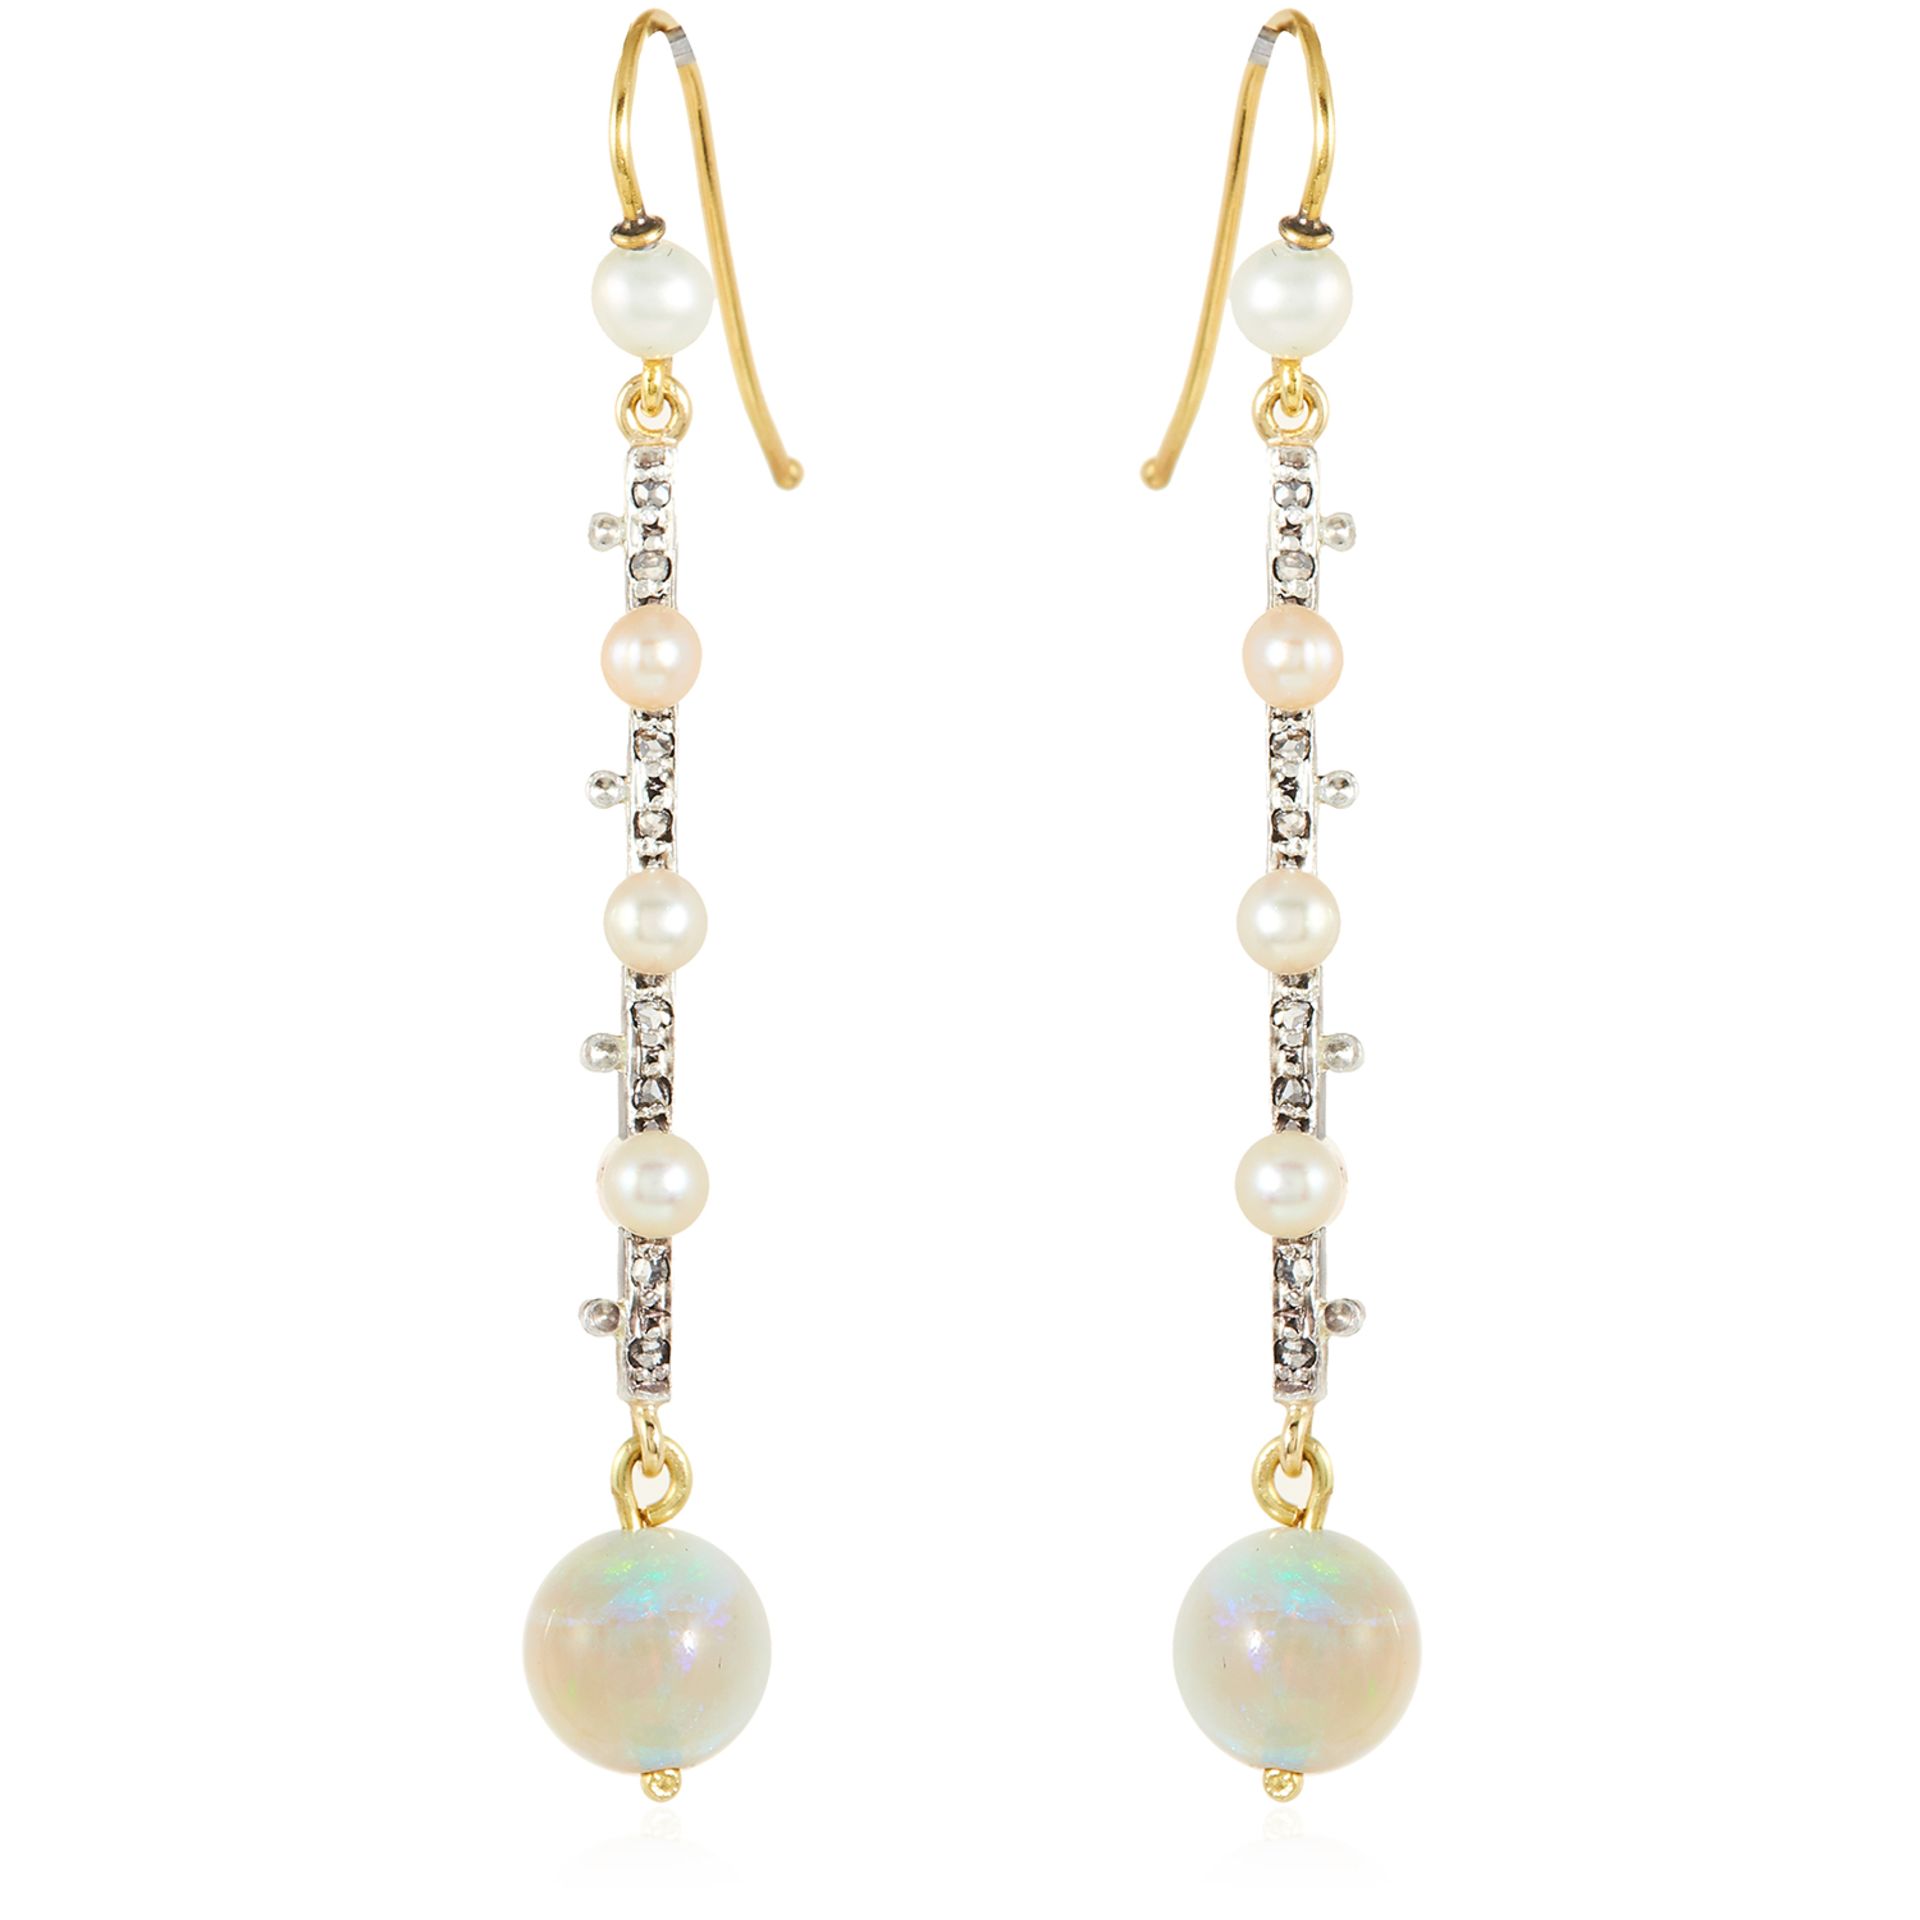 A PAIR OF ANTIQUE OPAL, PEARL AND DIAMOND EARRINGS in yellow gold and silver, each suspending a